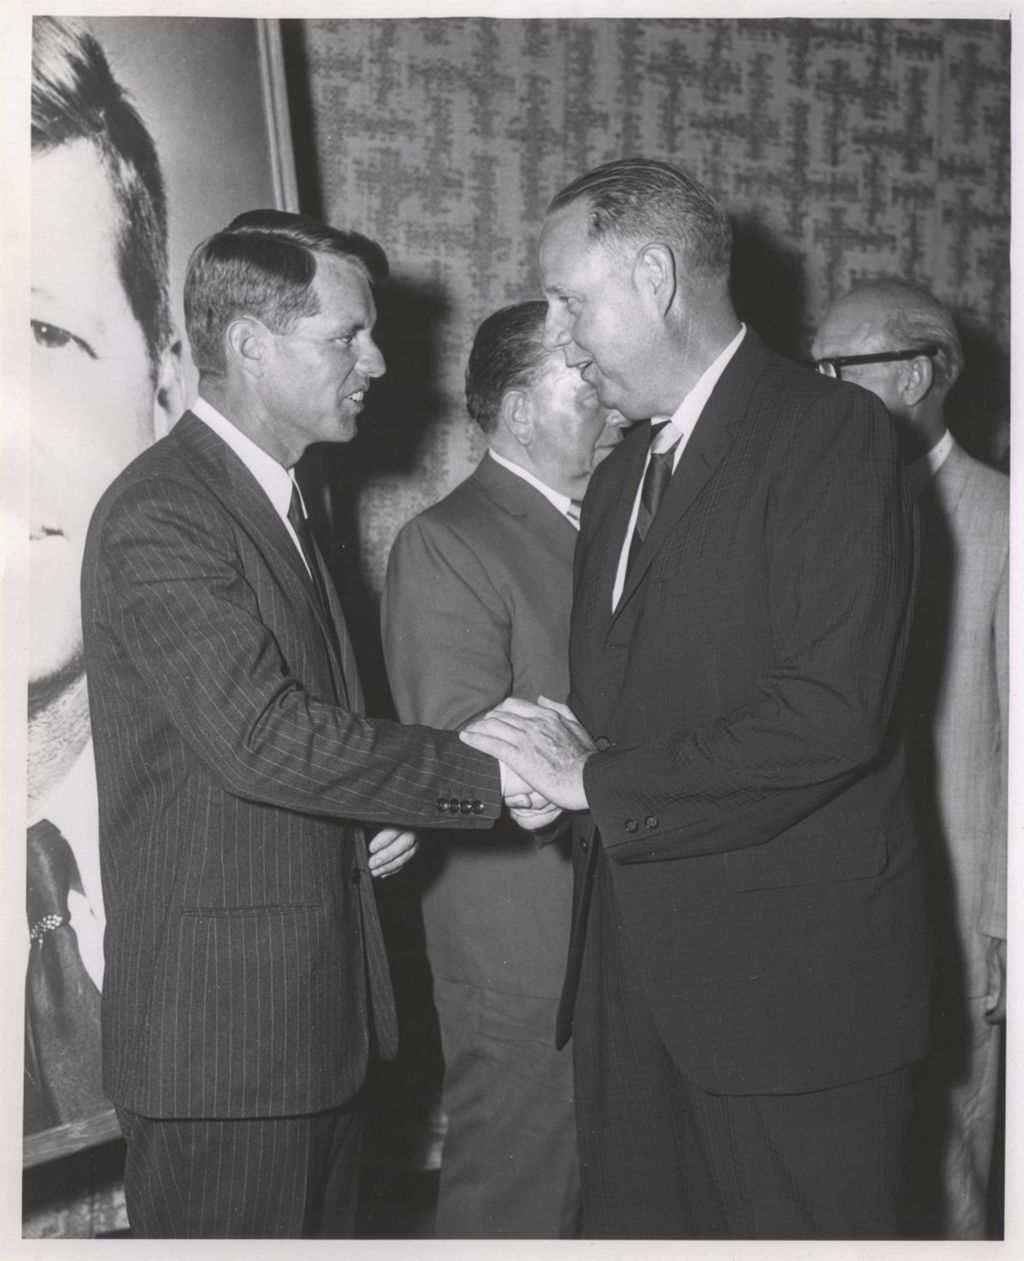 Robert F. Kennedy at an exhibition in Chicago